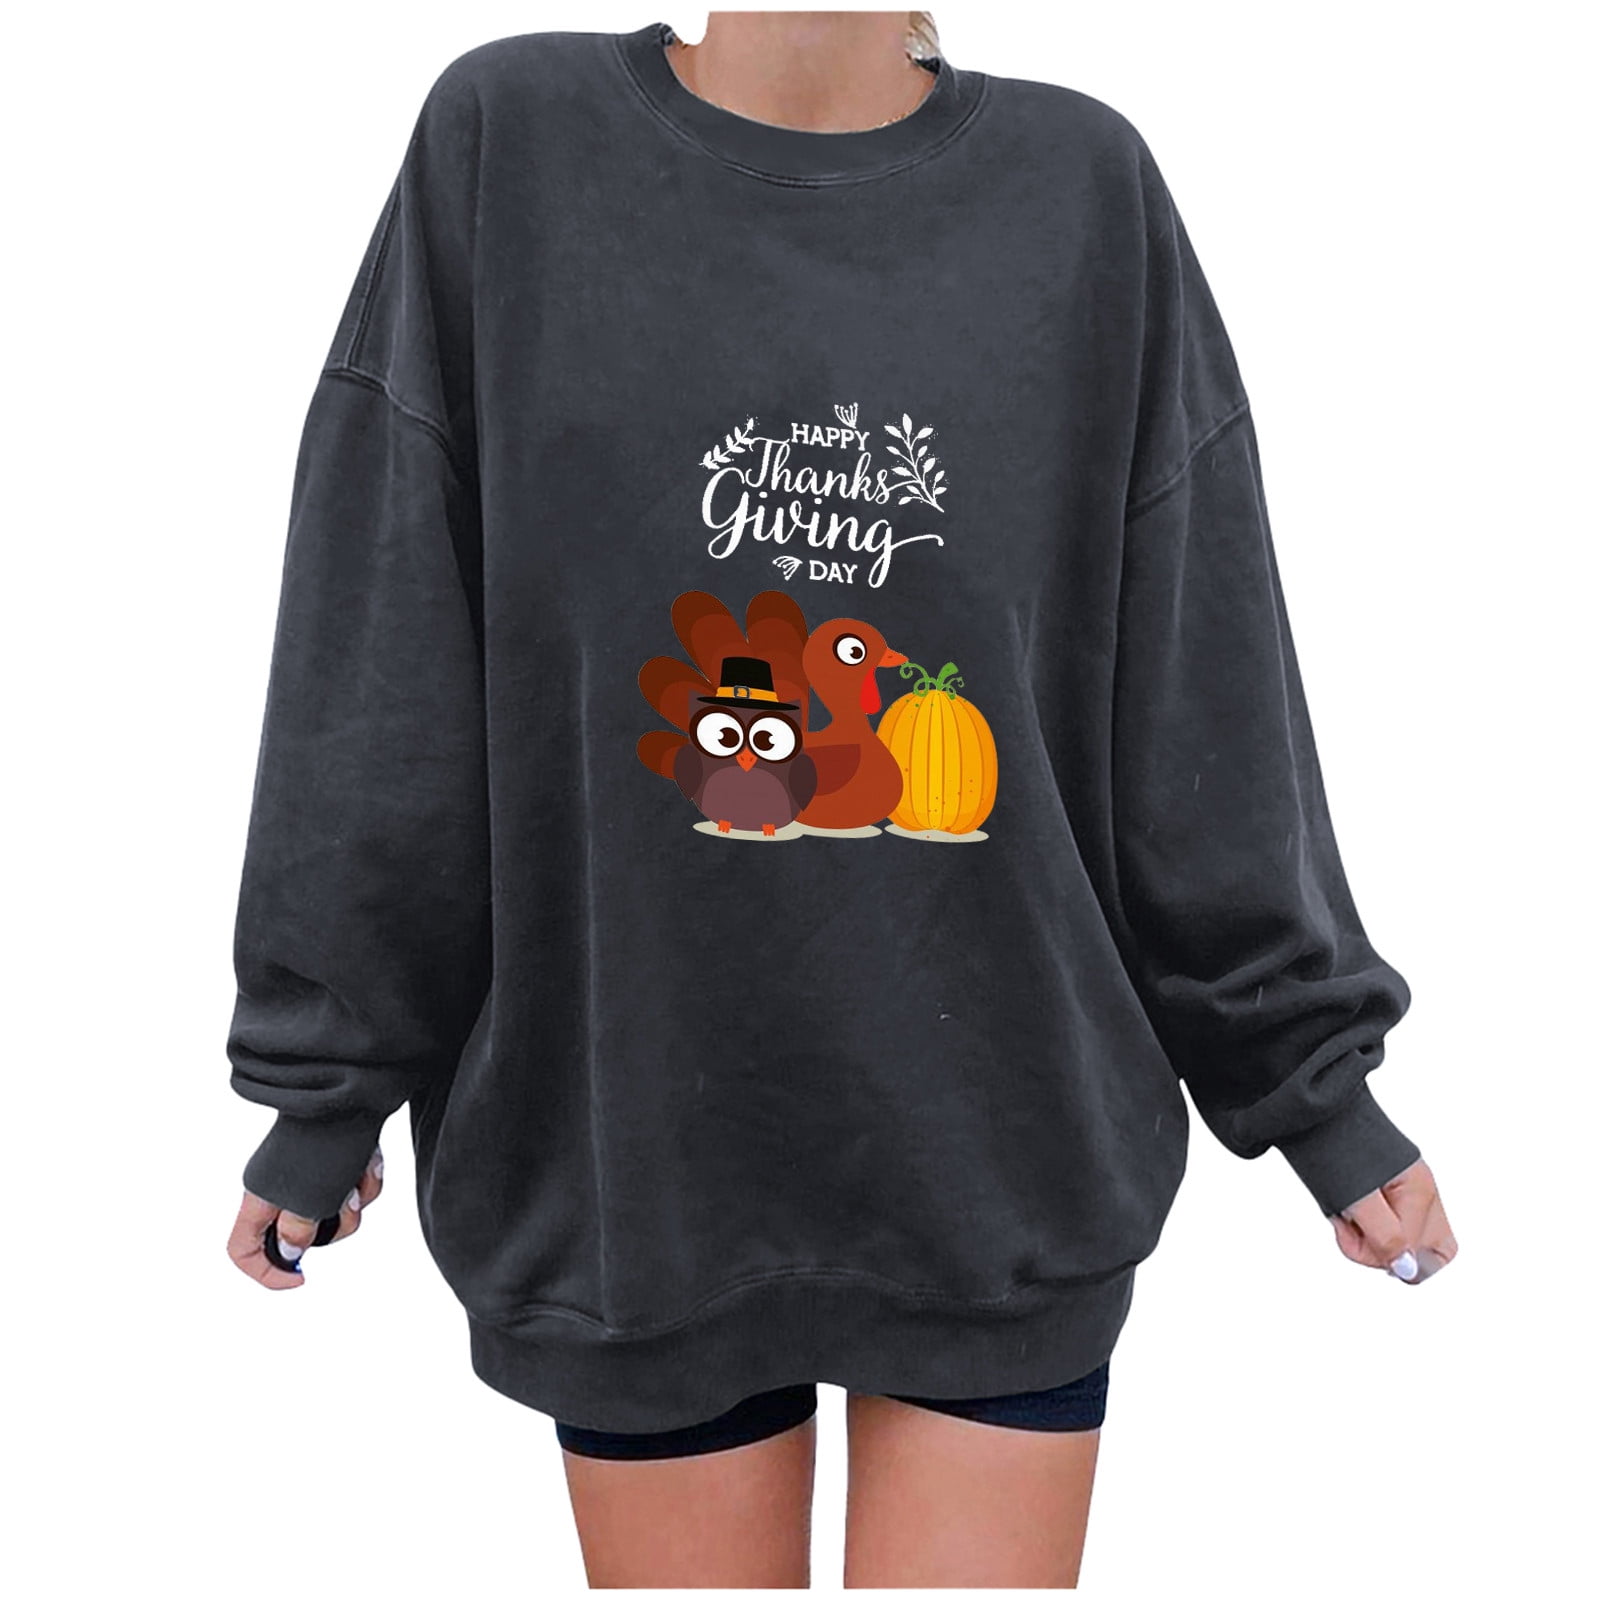 Funny Thanksgiving Day Womens Crew Neck Long Sleeve Tshirts Tops 